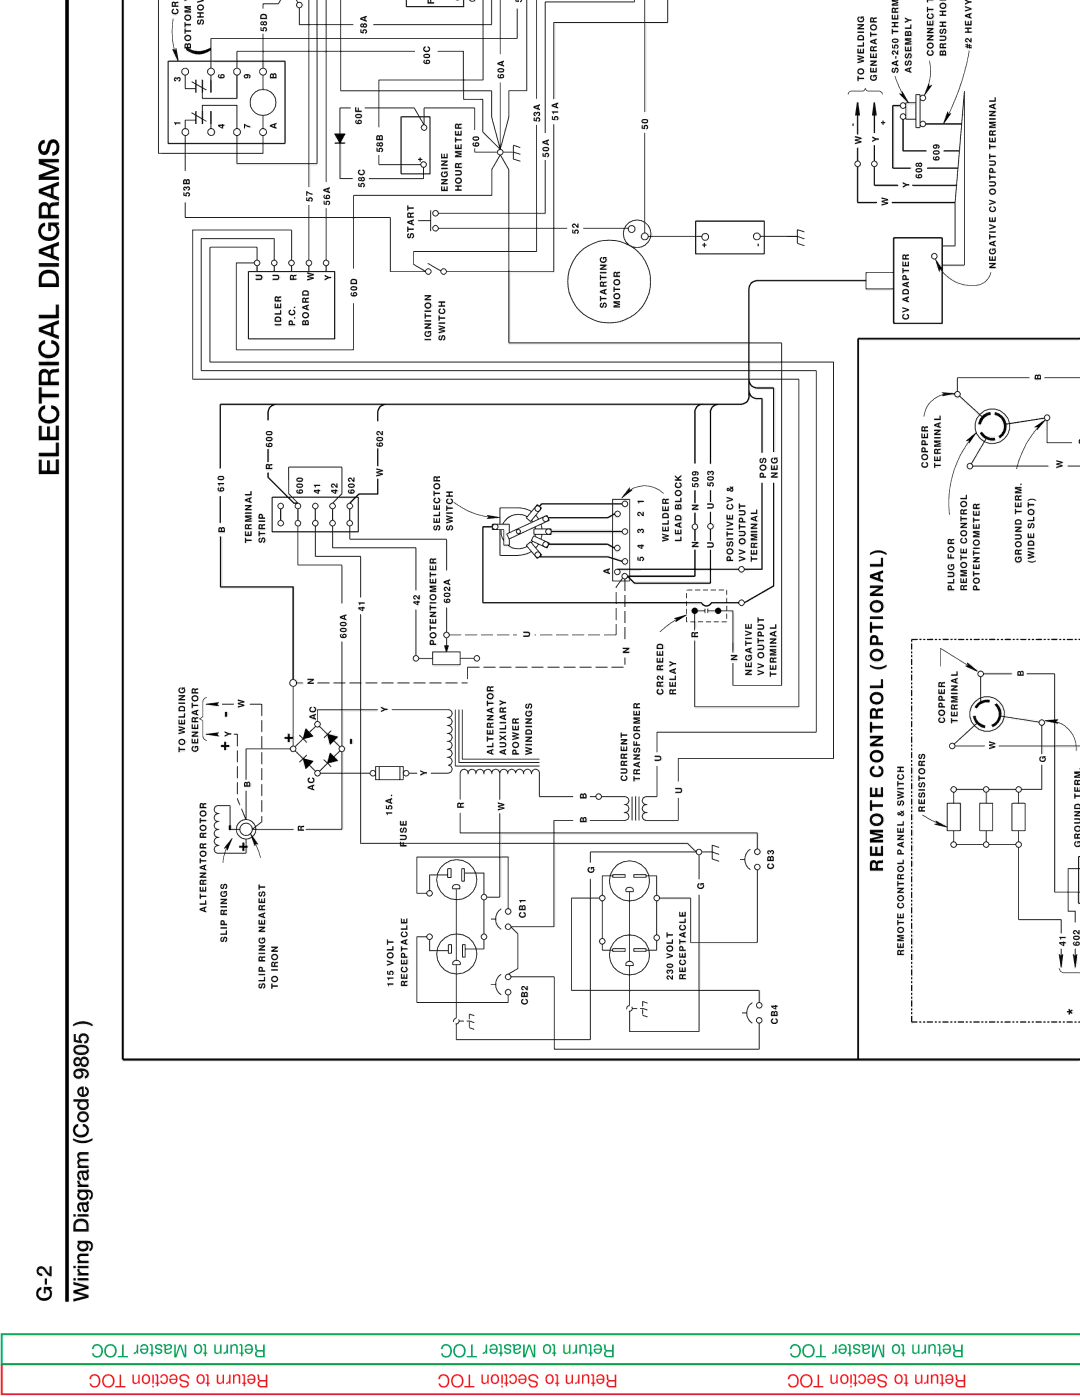 Lincoln Electric SVM125-A service manual Electrical Diagrams, Wiring Diagram Code 